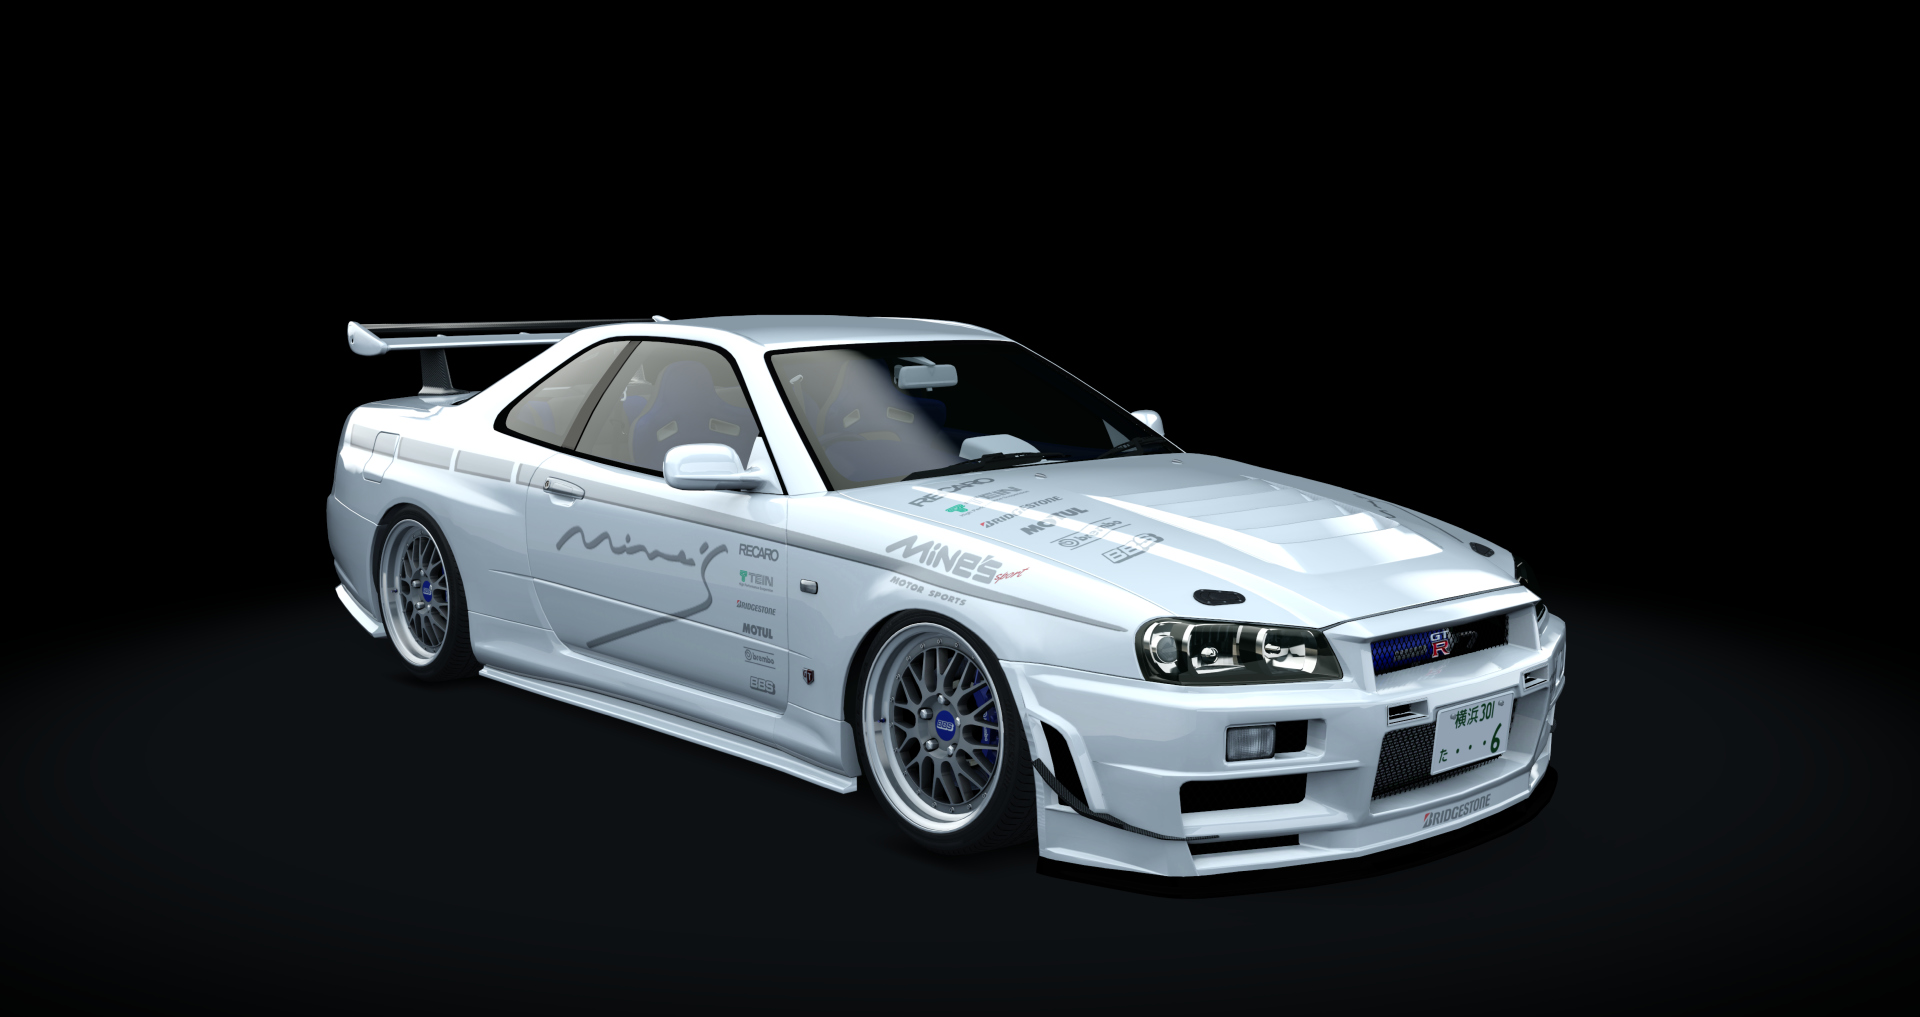 Nissan Skyline GT-R R34 Nismo Omori Factory S1 Preview Image